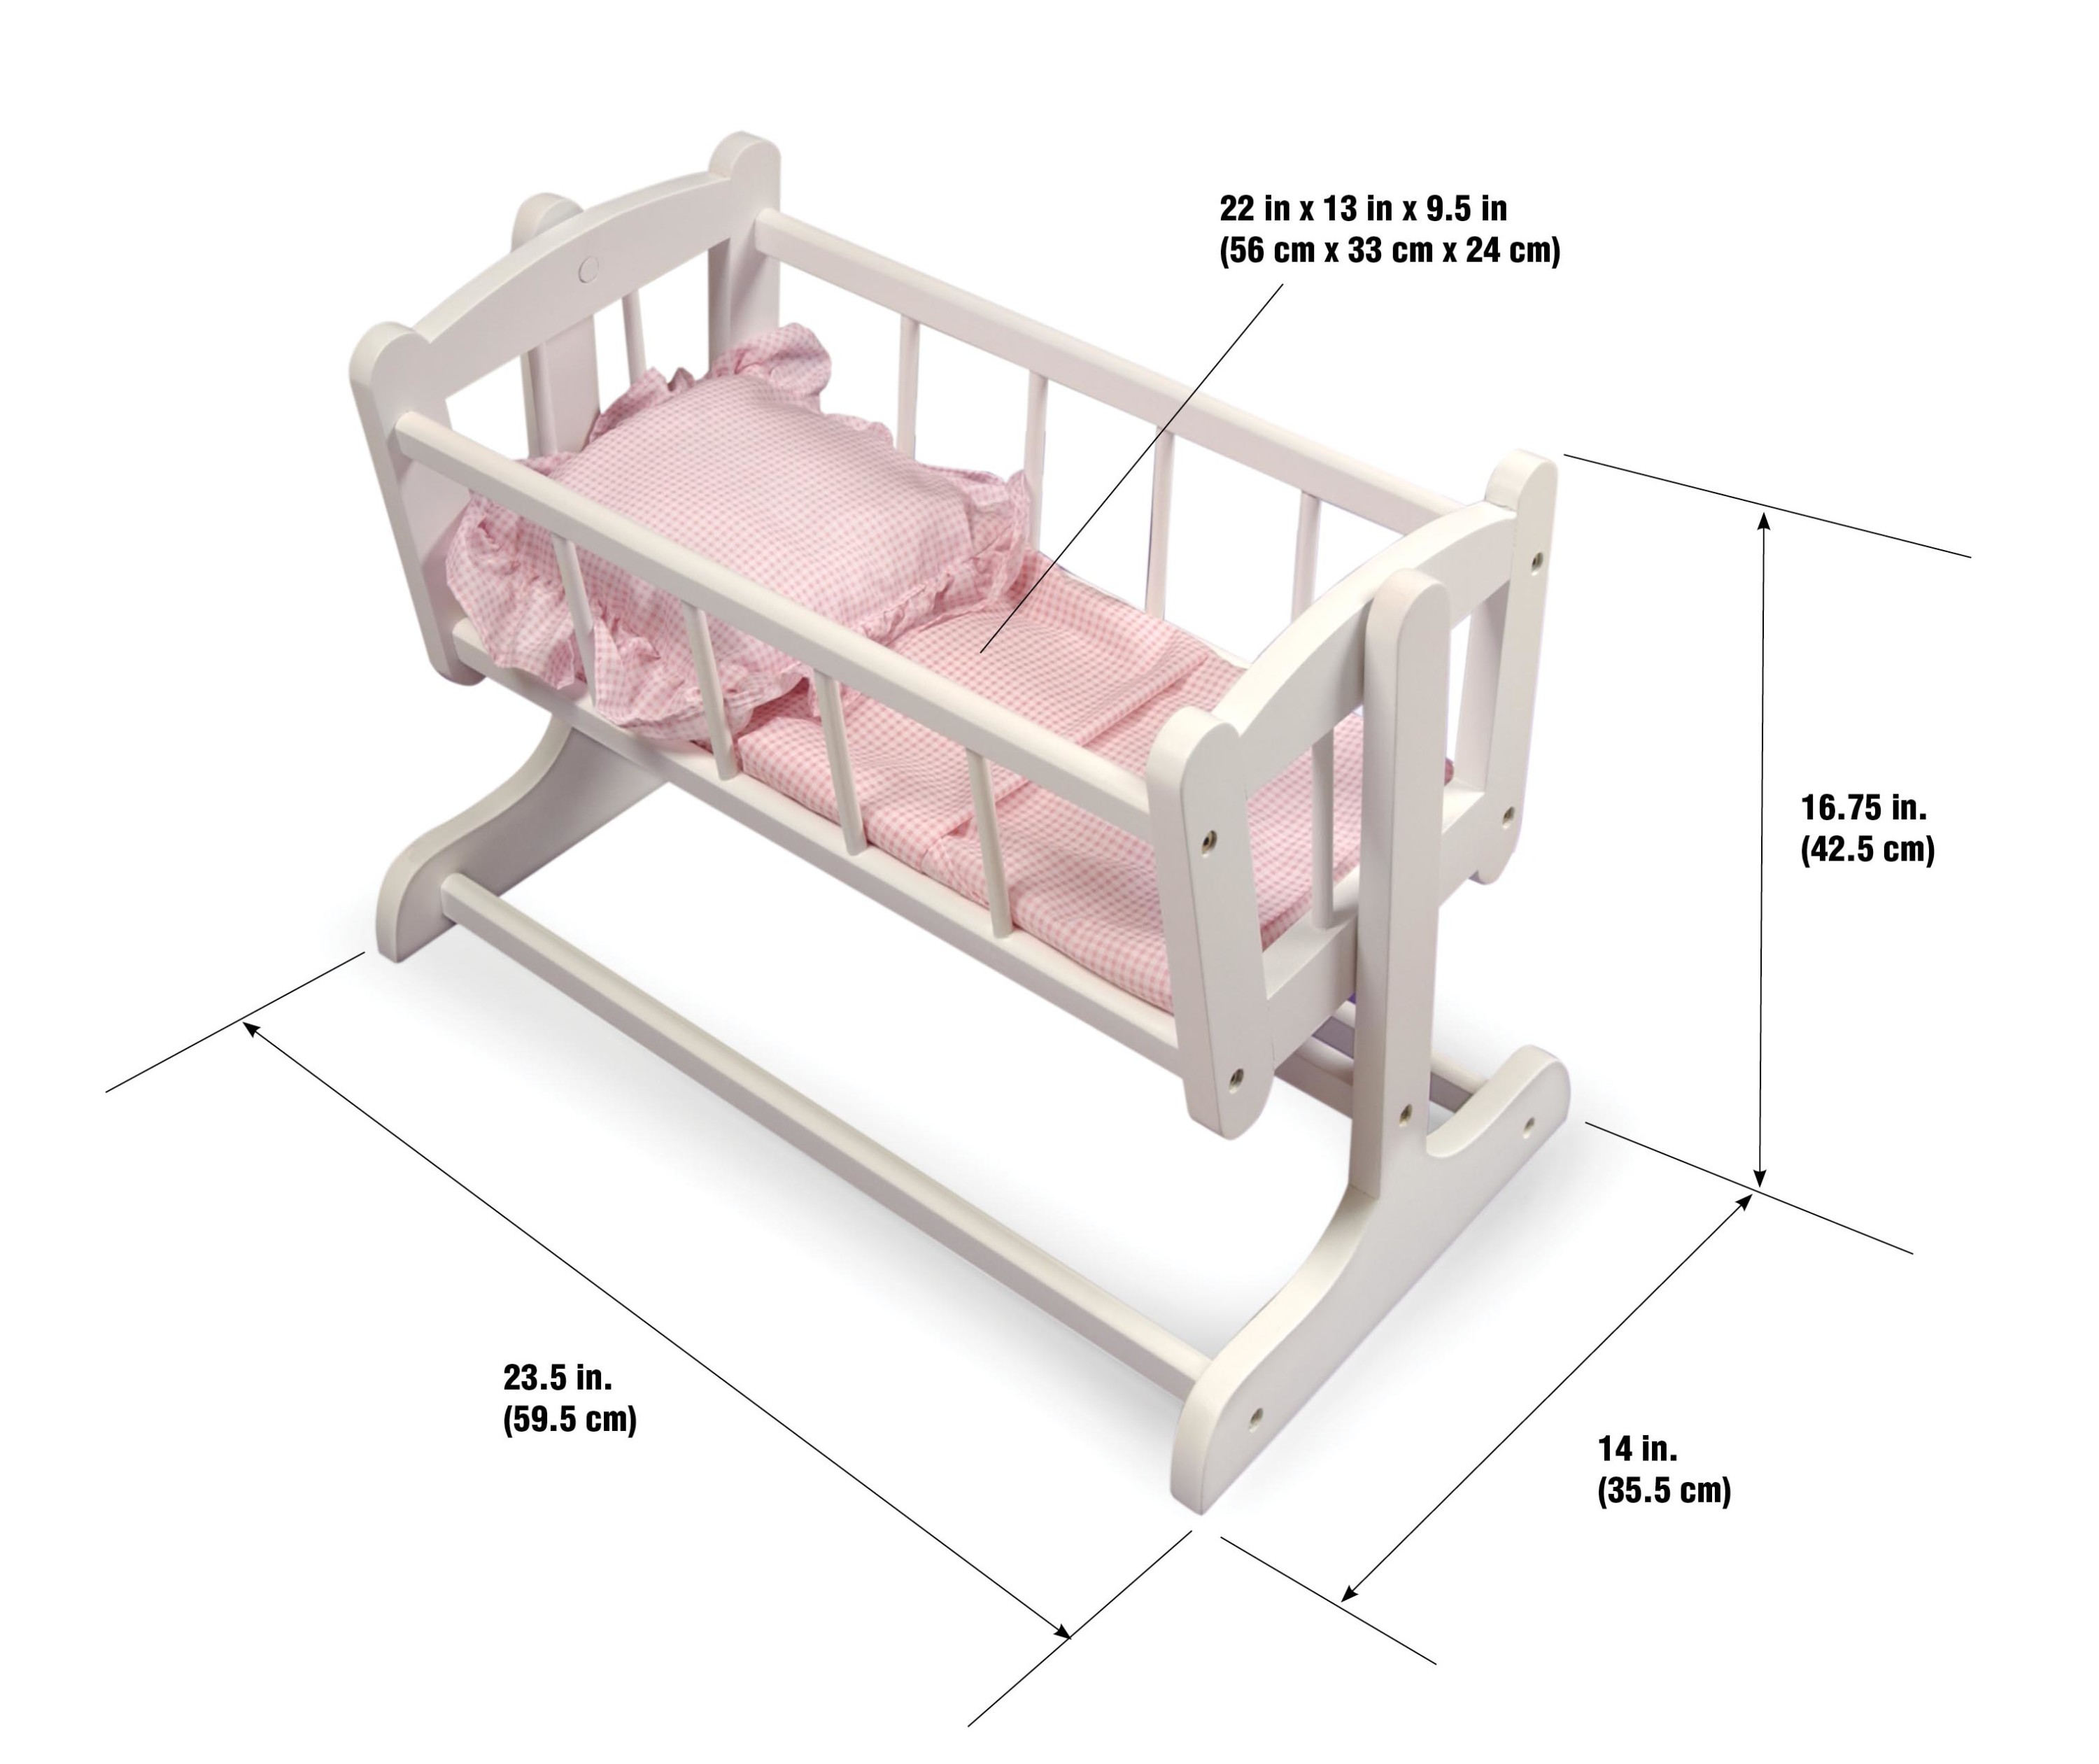 Badger Basket Heirloom Style Doll Cradle with Bedding - White/Pink - image 4 of 8